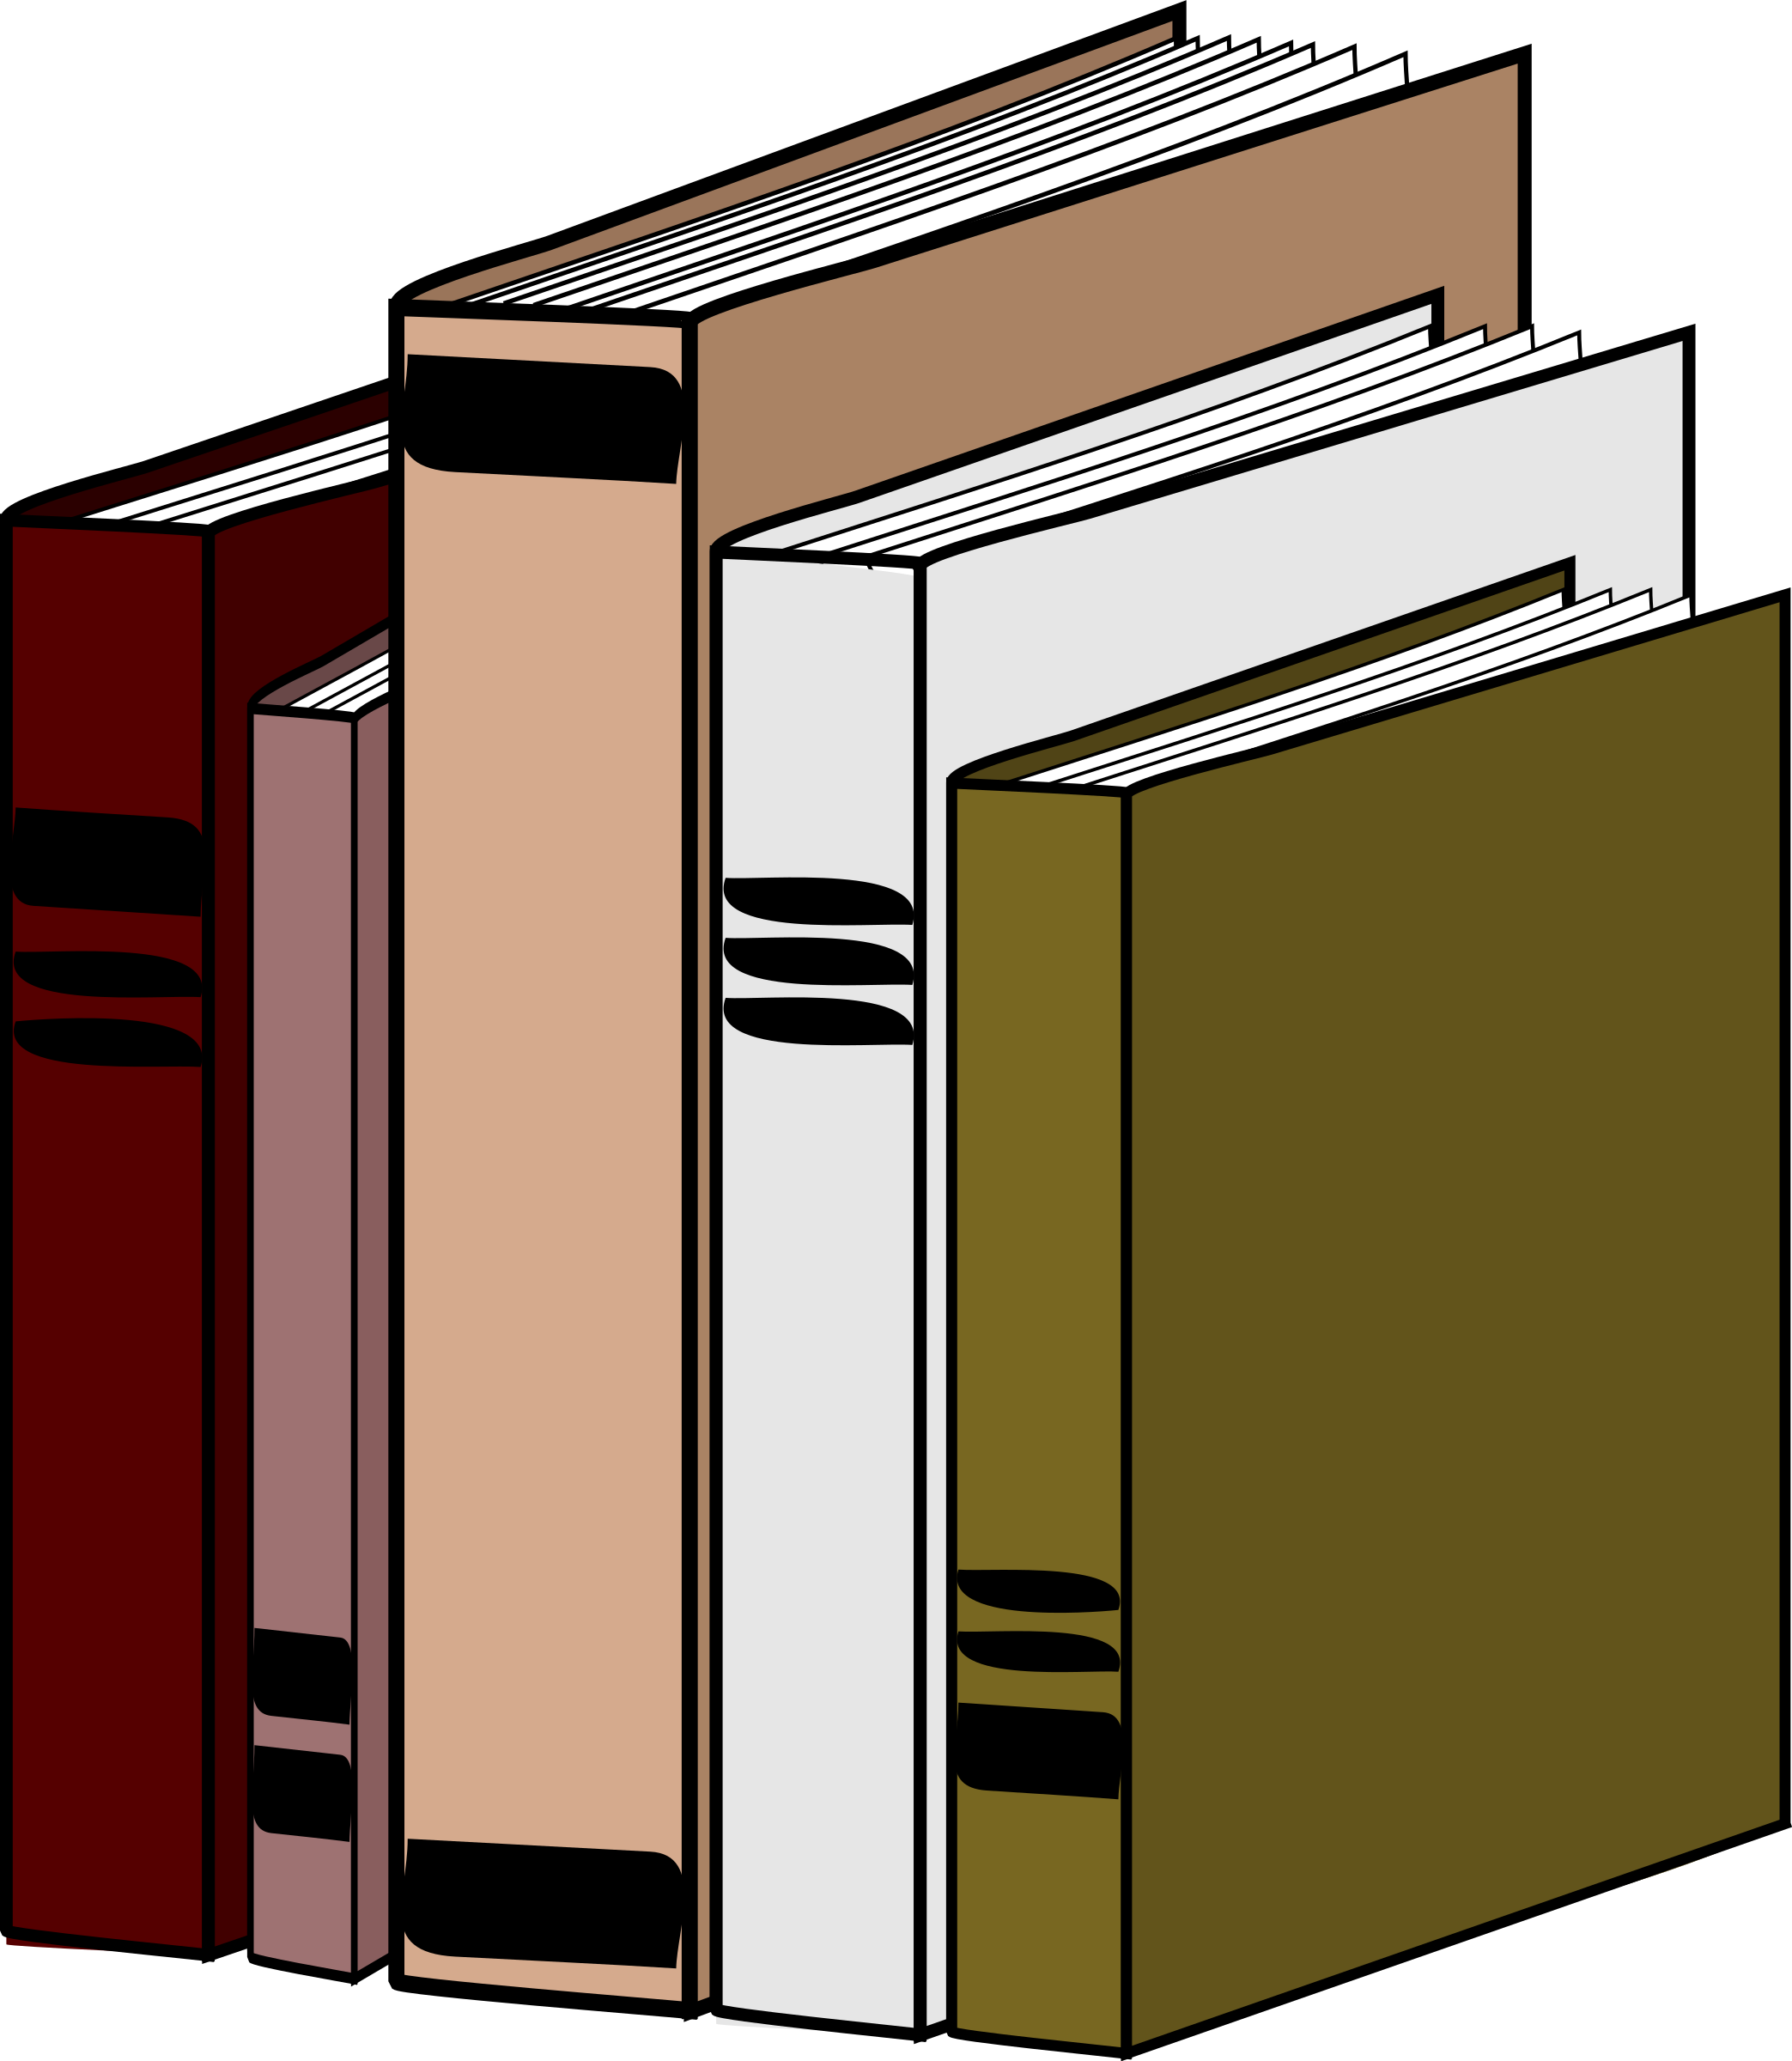 Big image png. Clipart books office